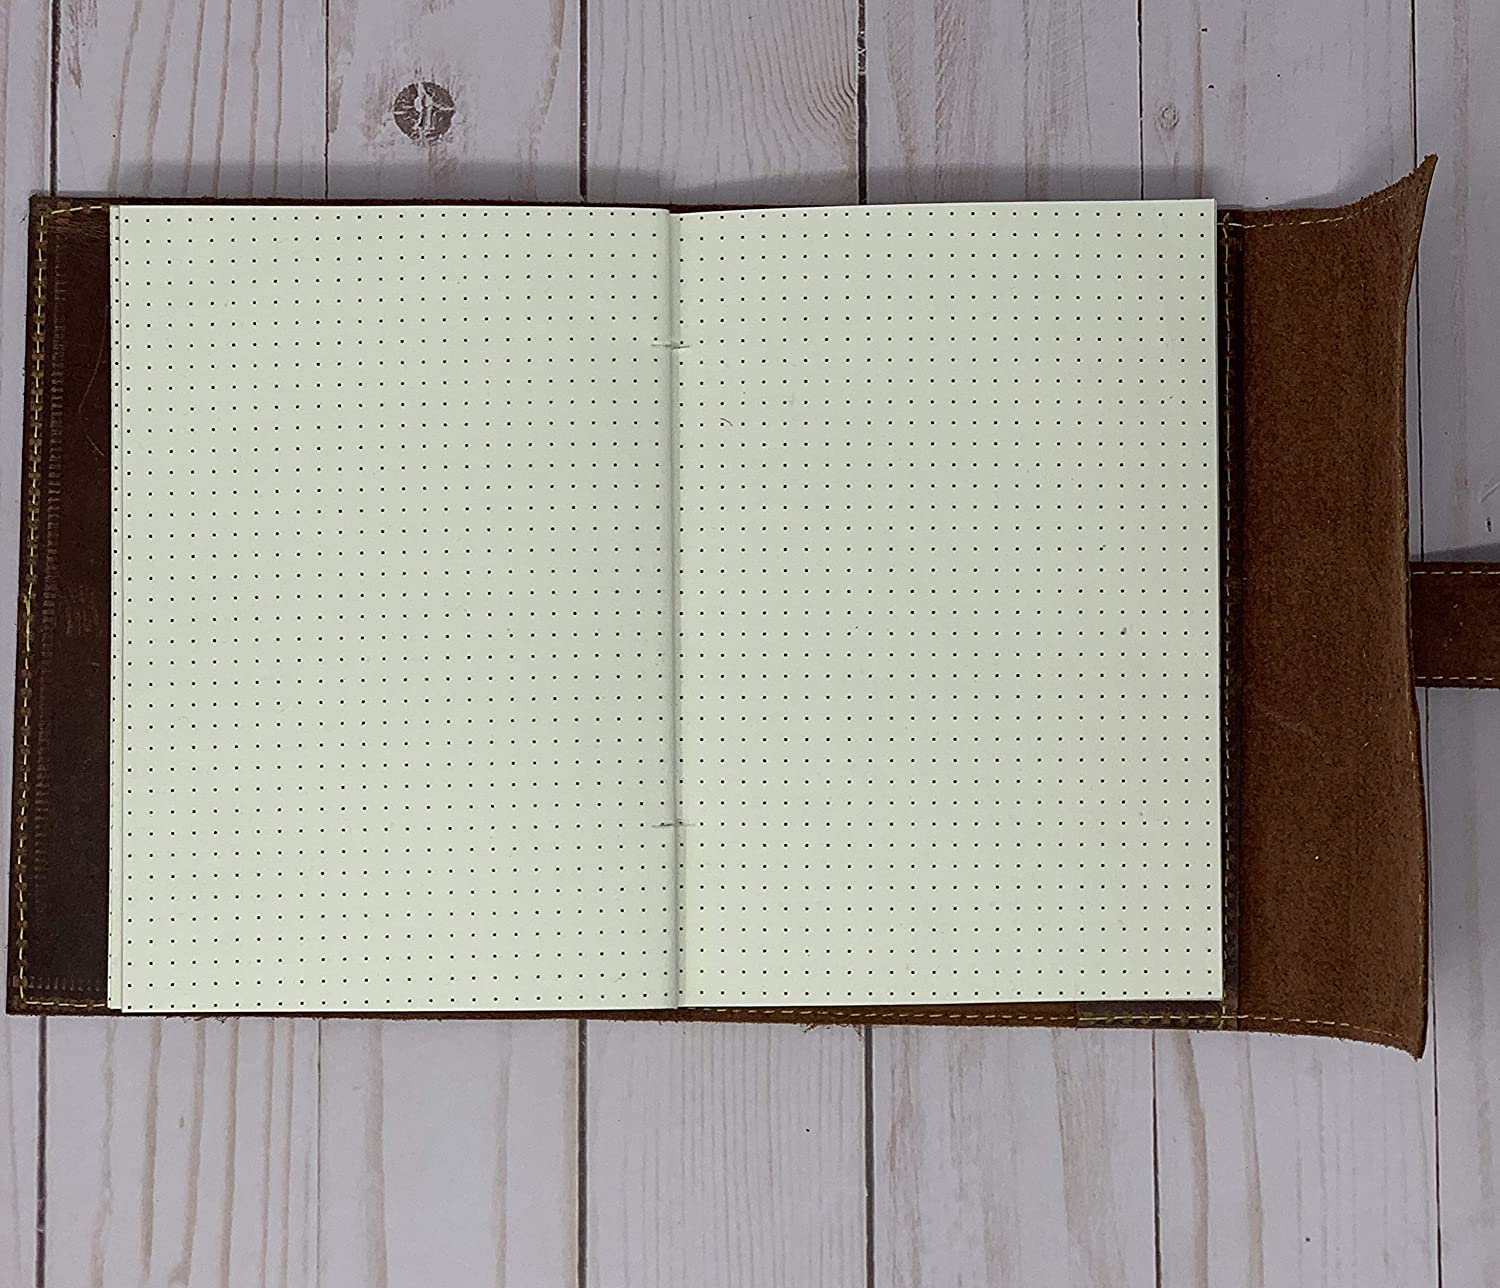 Tuk Tuk Press®  Handmade Leather Journal, 200 Tree Free Thick Recycled Cotton Dotted Pages, Refillable